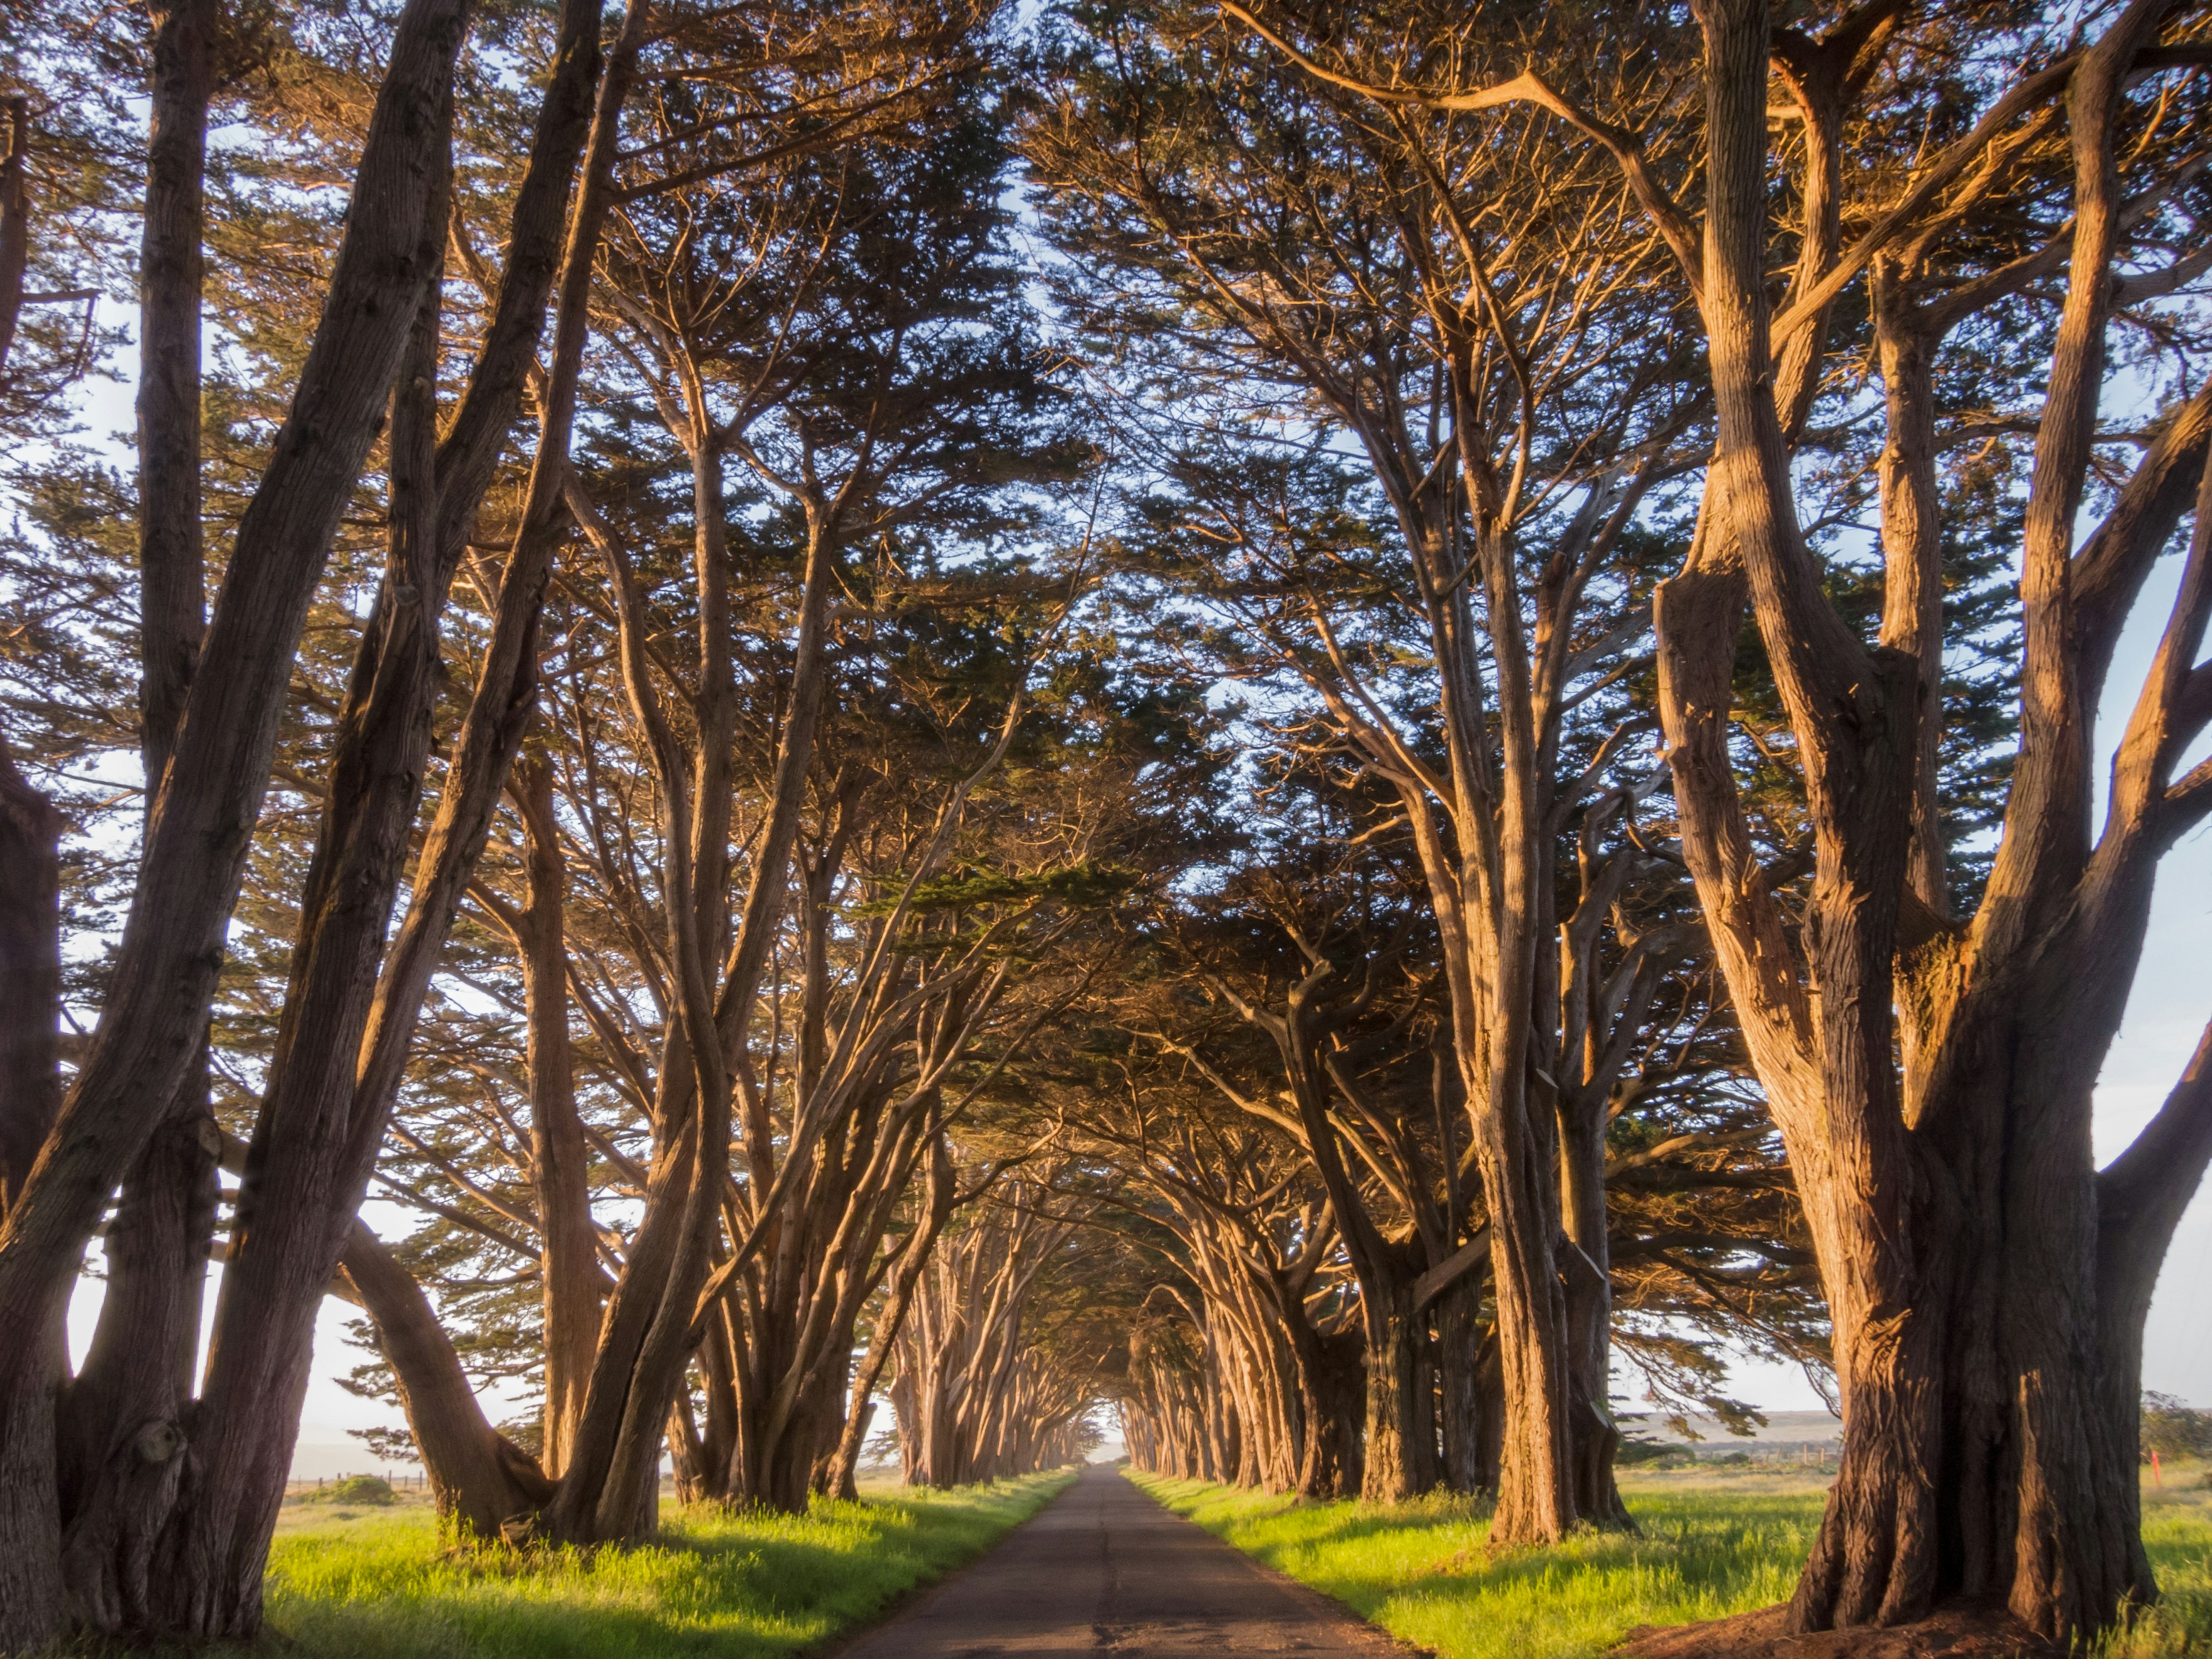 Cypress trees planted on either side of a long road bend inwards to create a tunnel